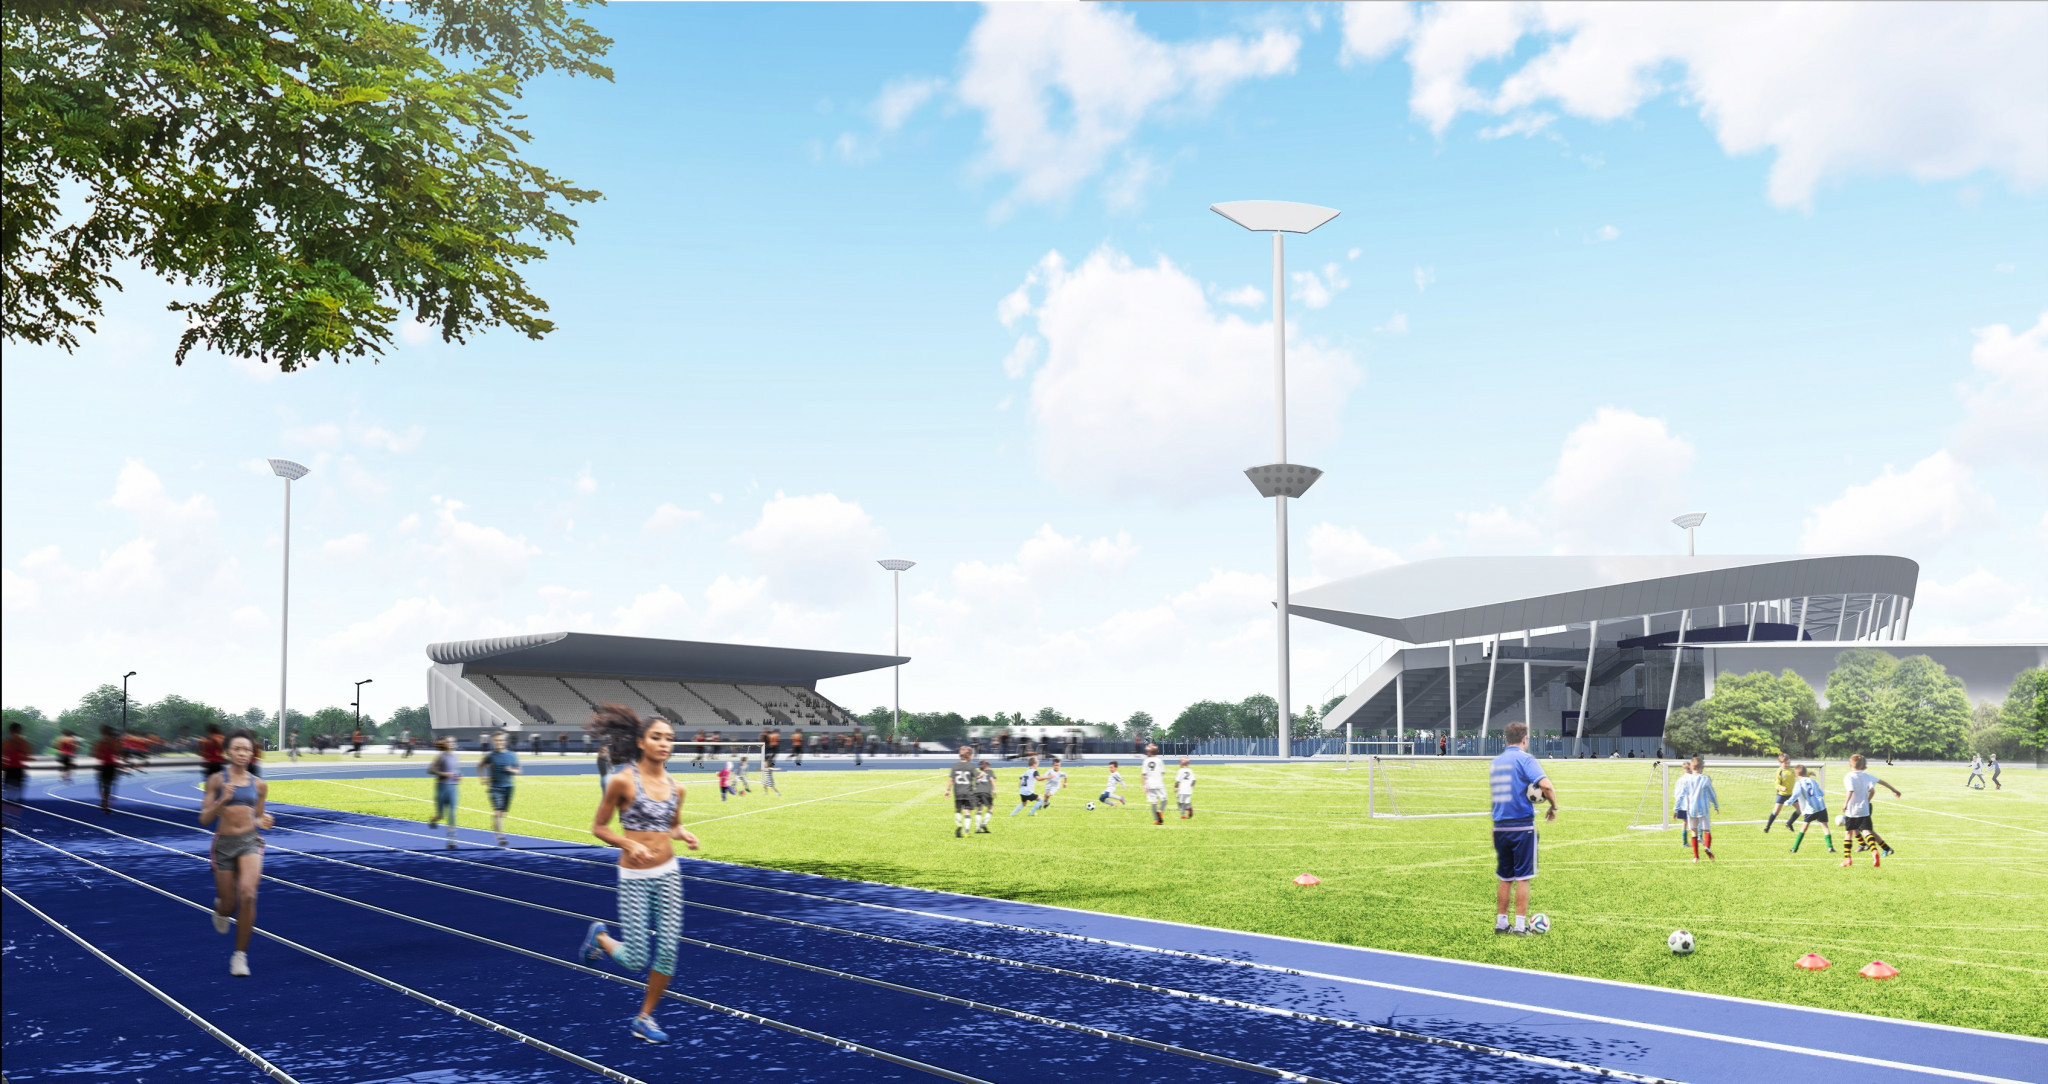 It is hoped the Alexander Stadium will become a high-quality venue for diverse sporting, leisure, community and cultural events in the decades to come ©Birmingham City Council